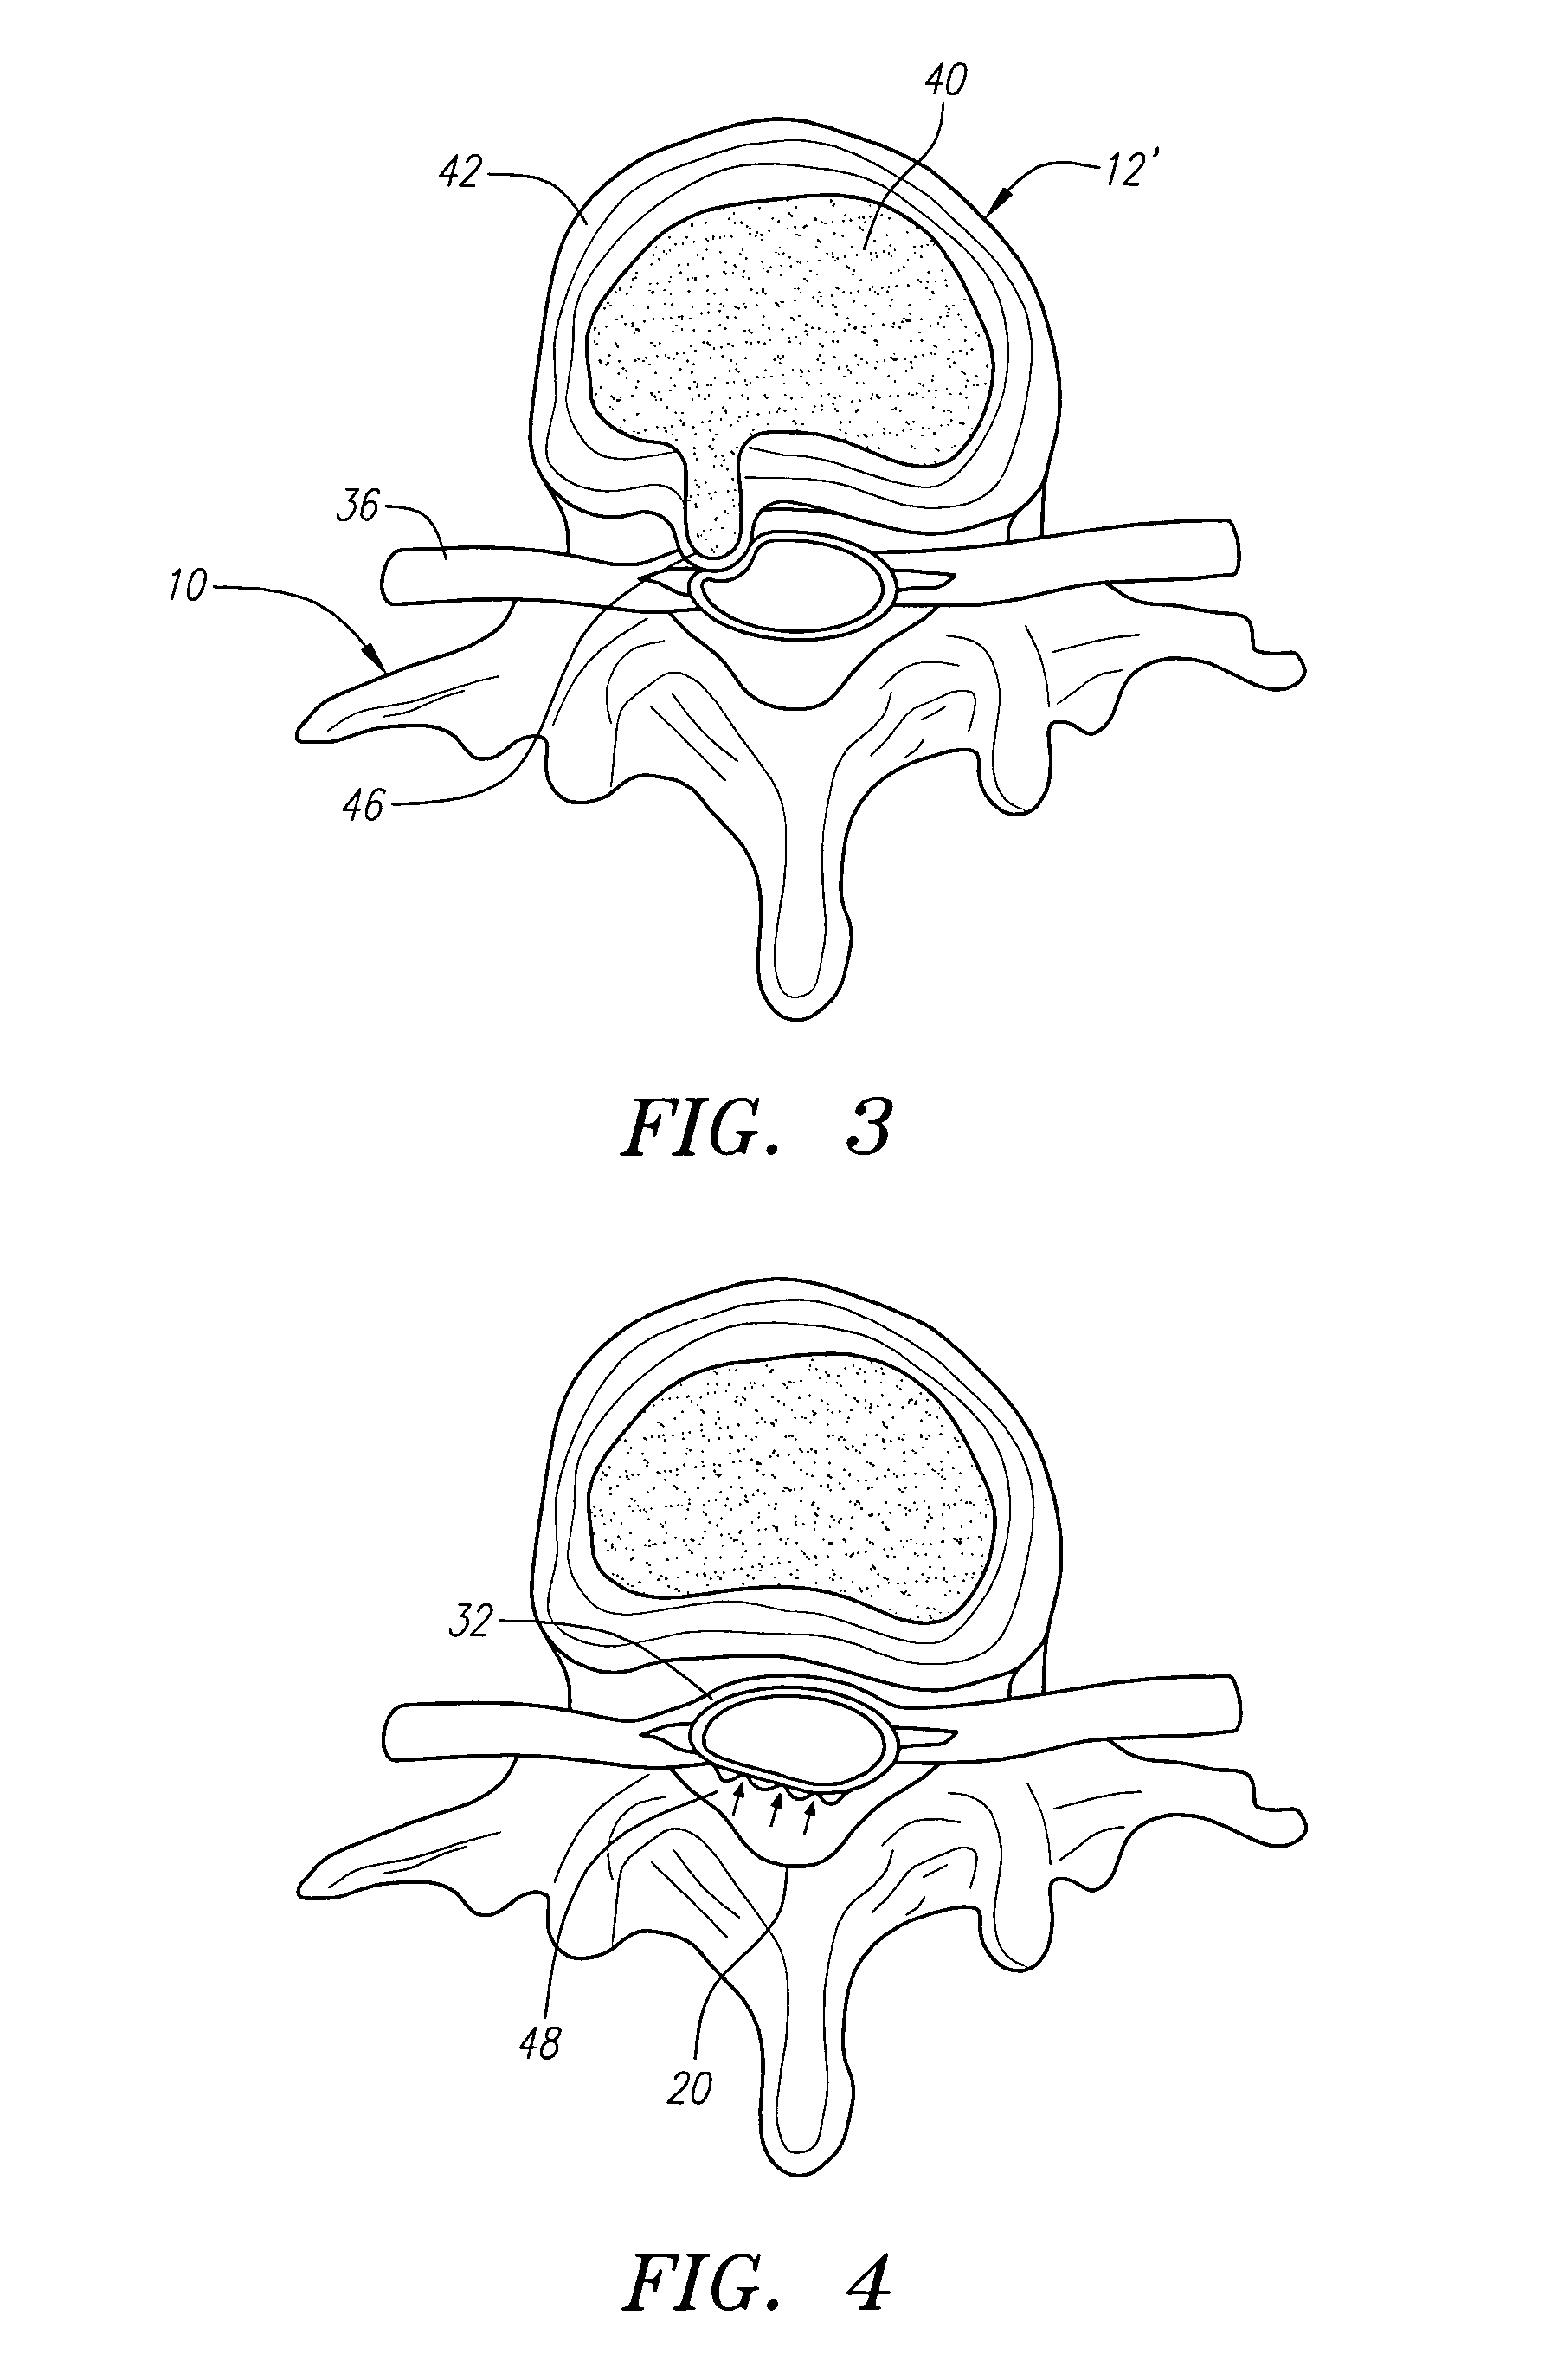 Radially adjustable tissue removal device